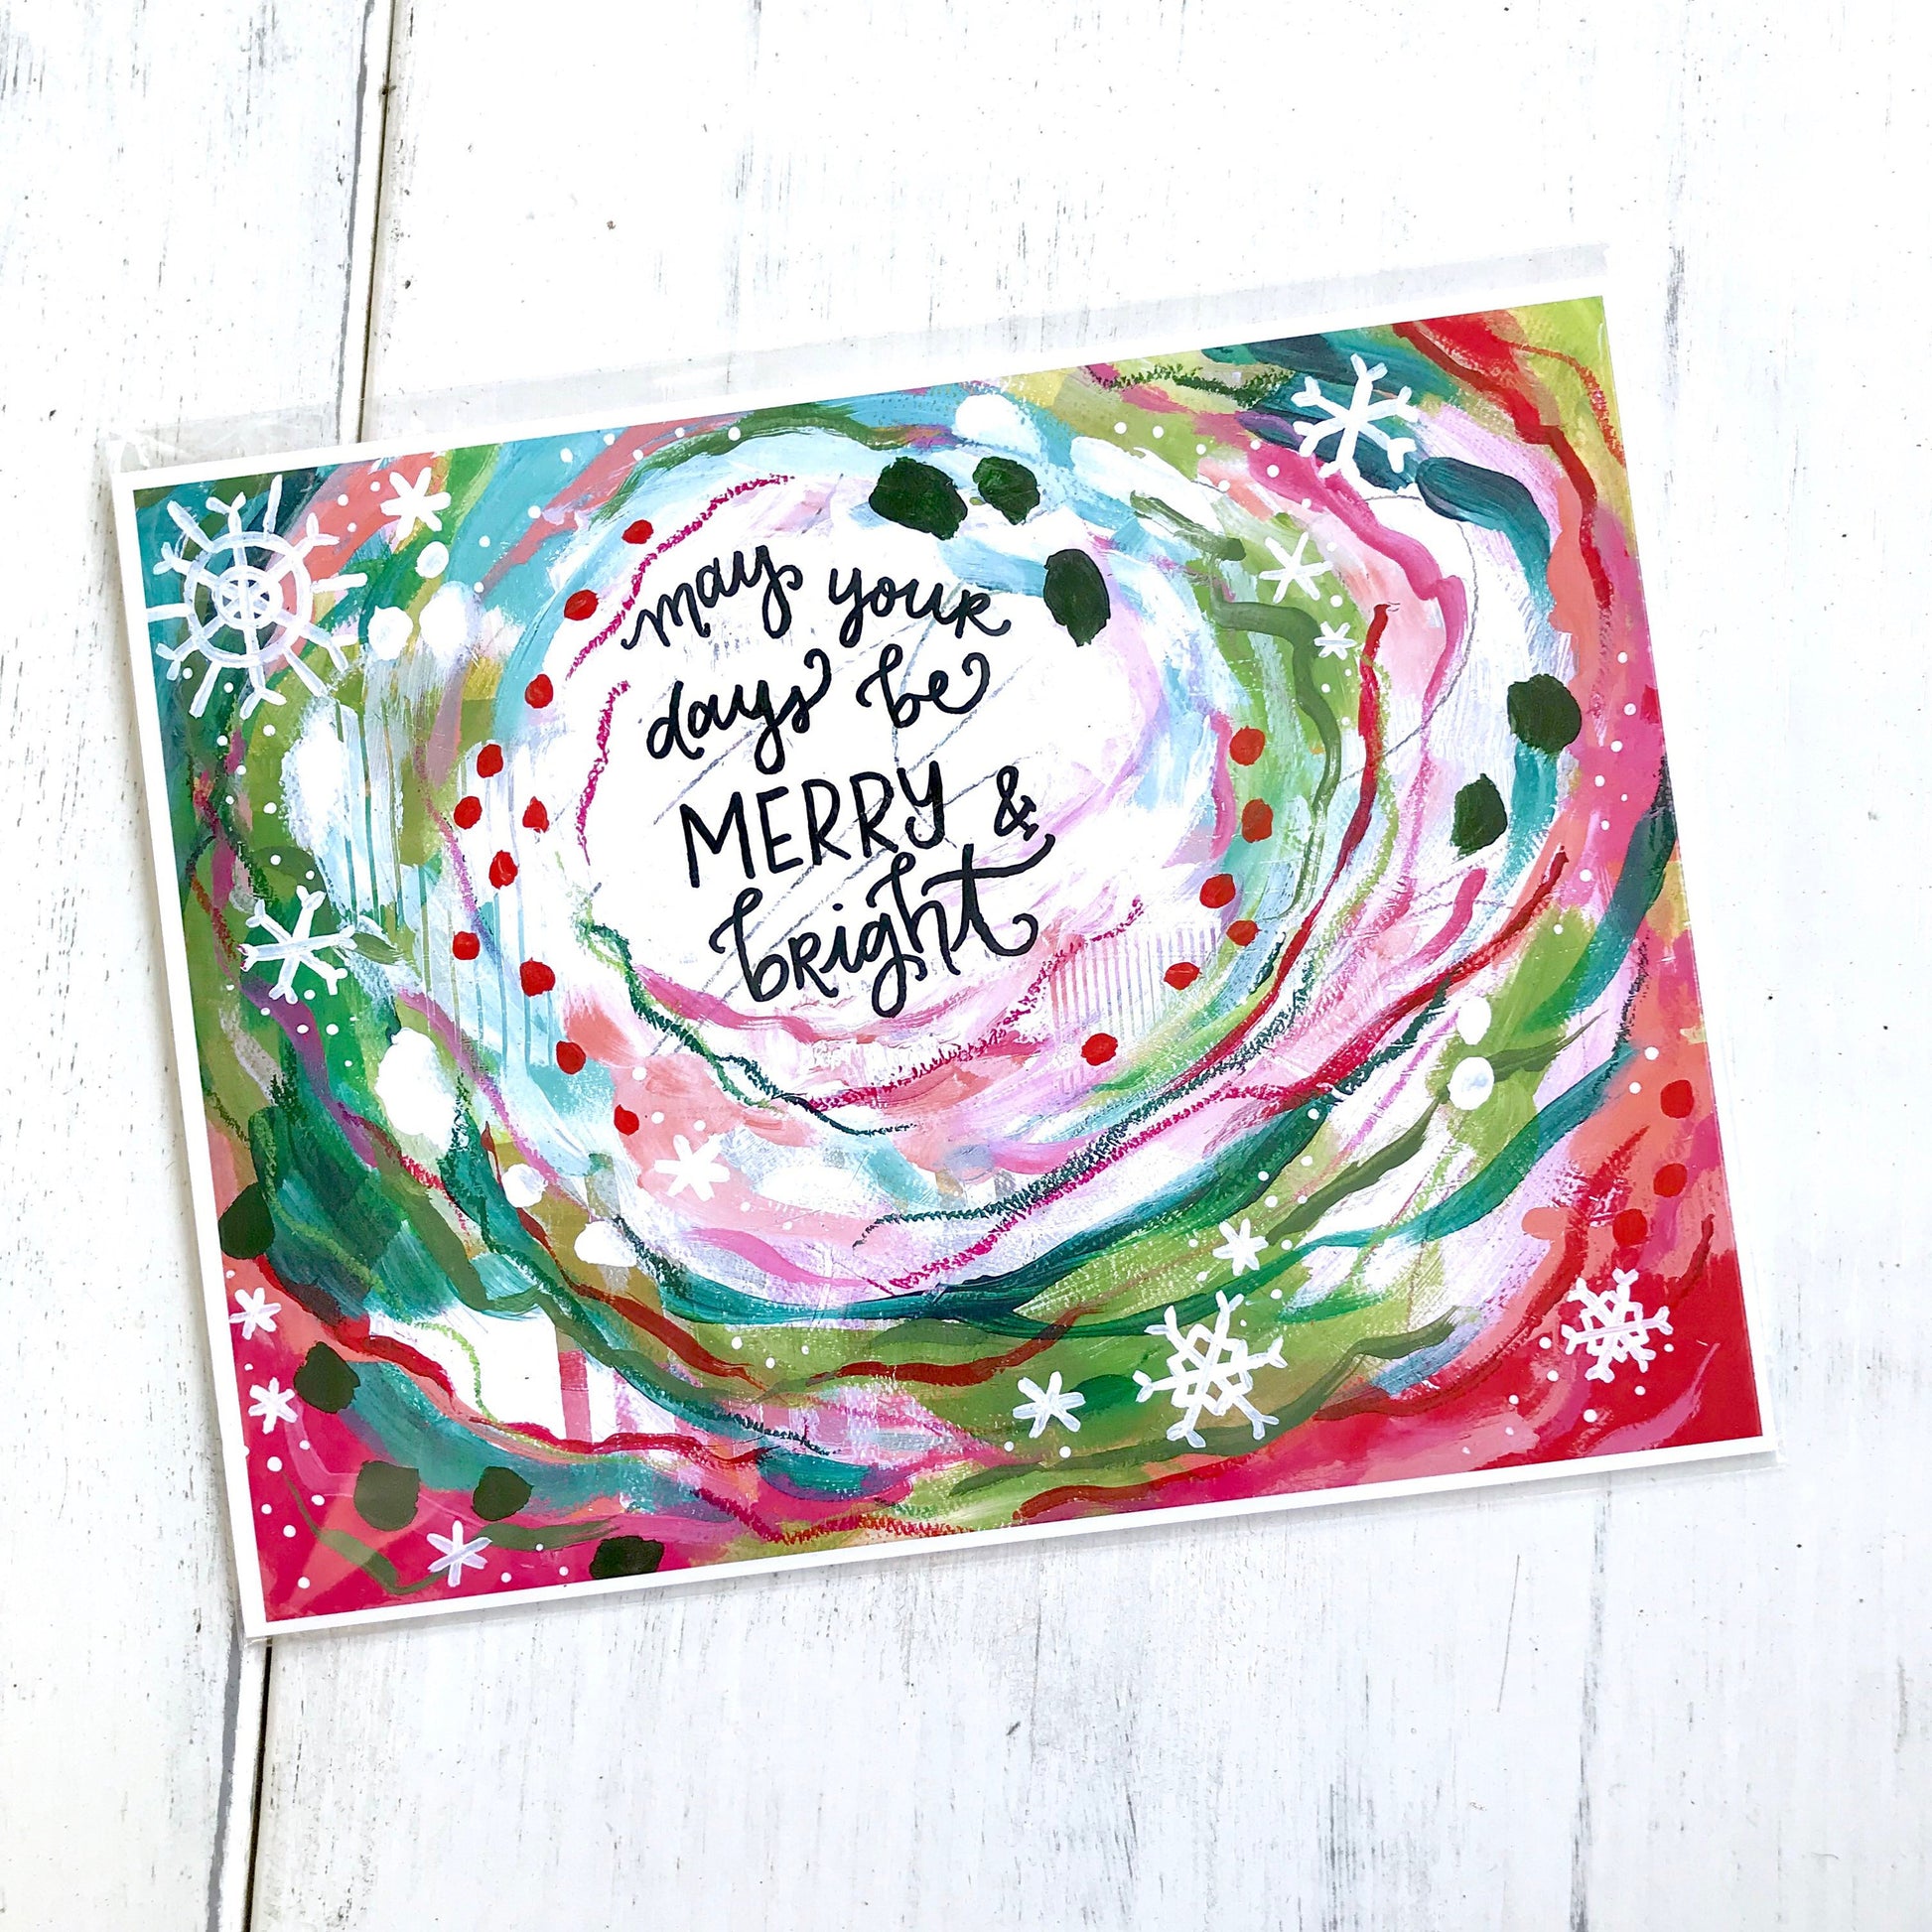 May your days be Merry and Bright / 11 x 8.5 inch inspirational art print / Christmas decorations / Holiday home decor / colorful art gift - Bethany Joy Art